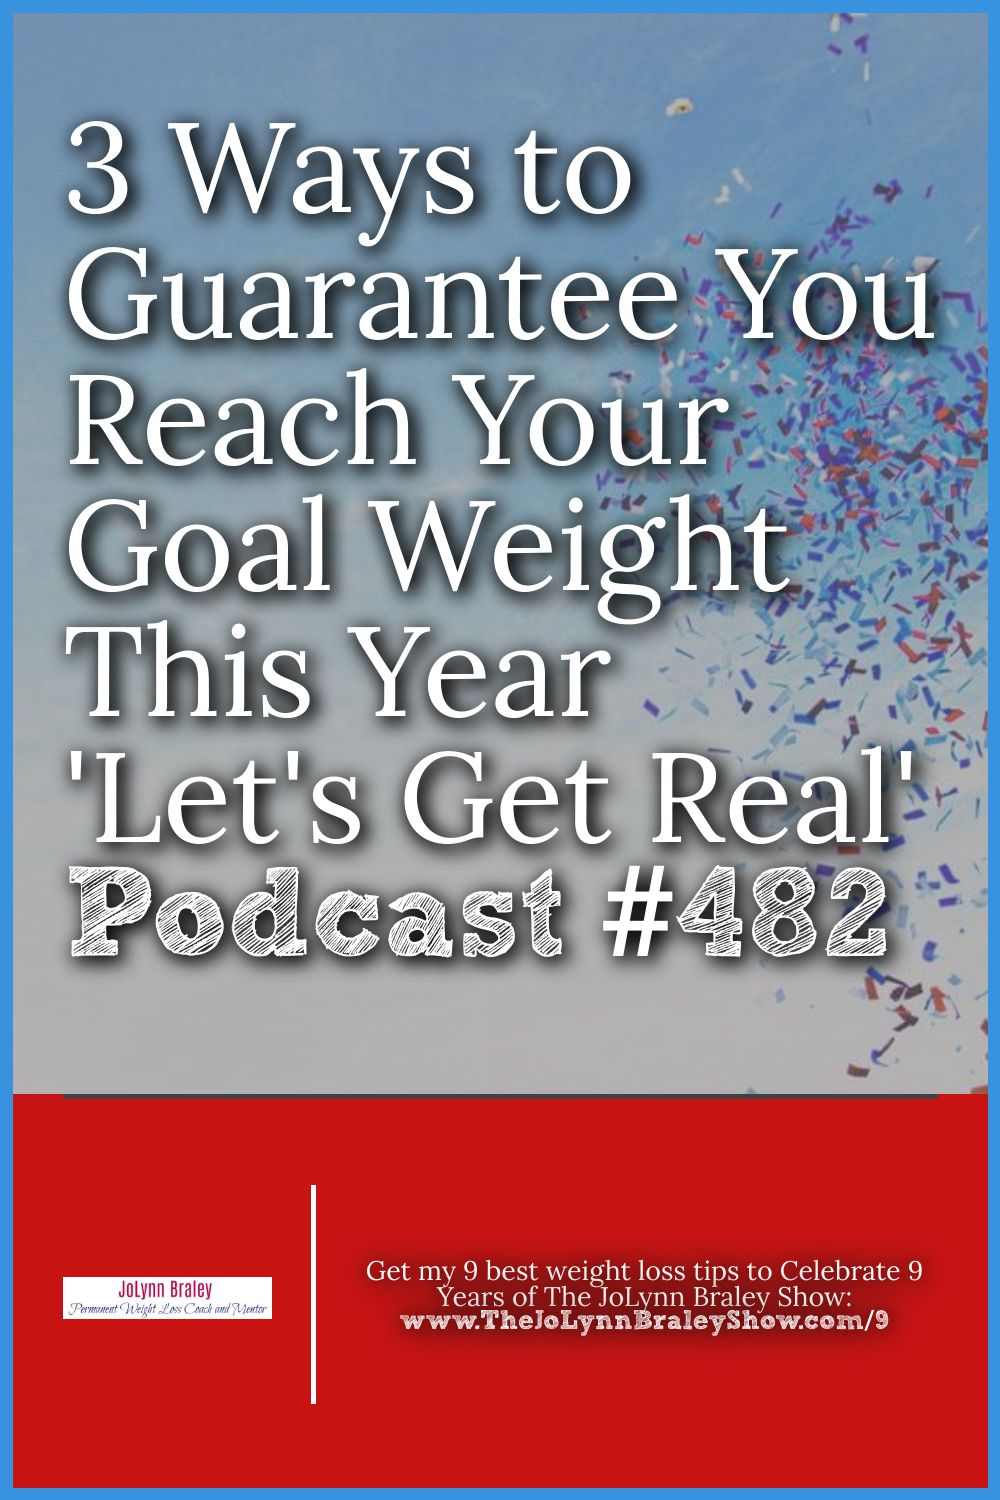 3 Ways to Guarantee You Reach Your Goal Weight This Year [Podcast #482]